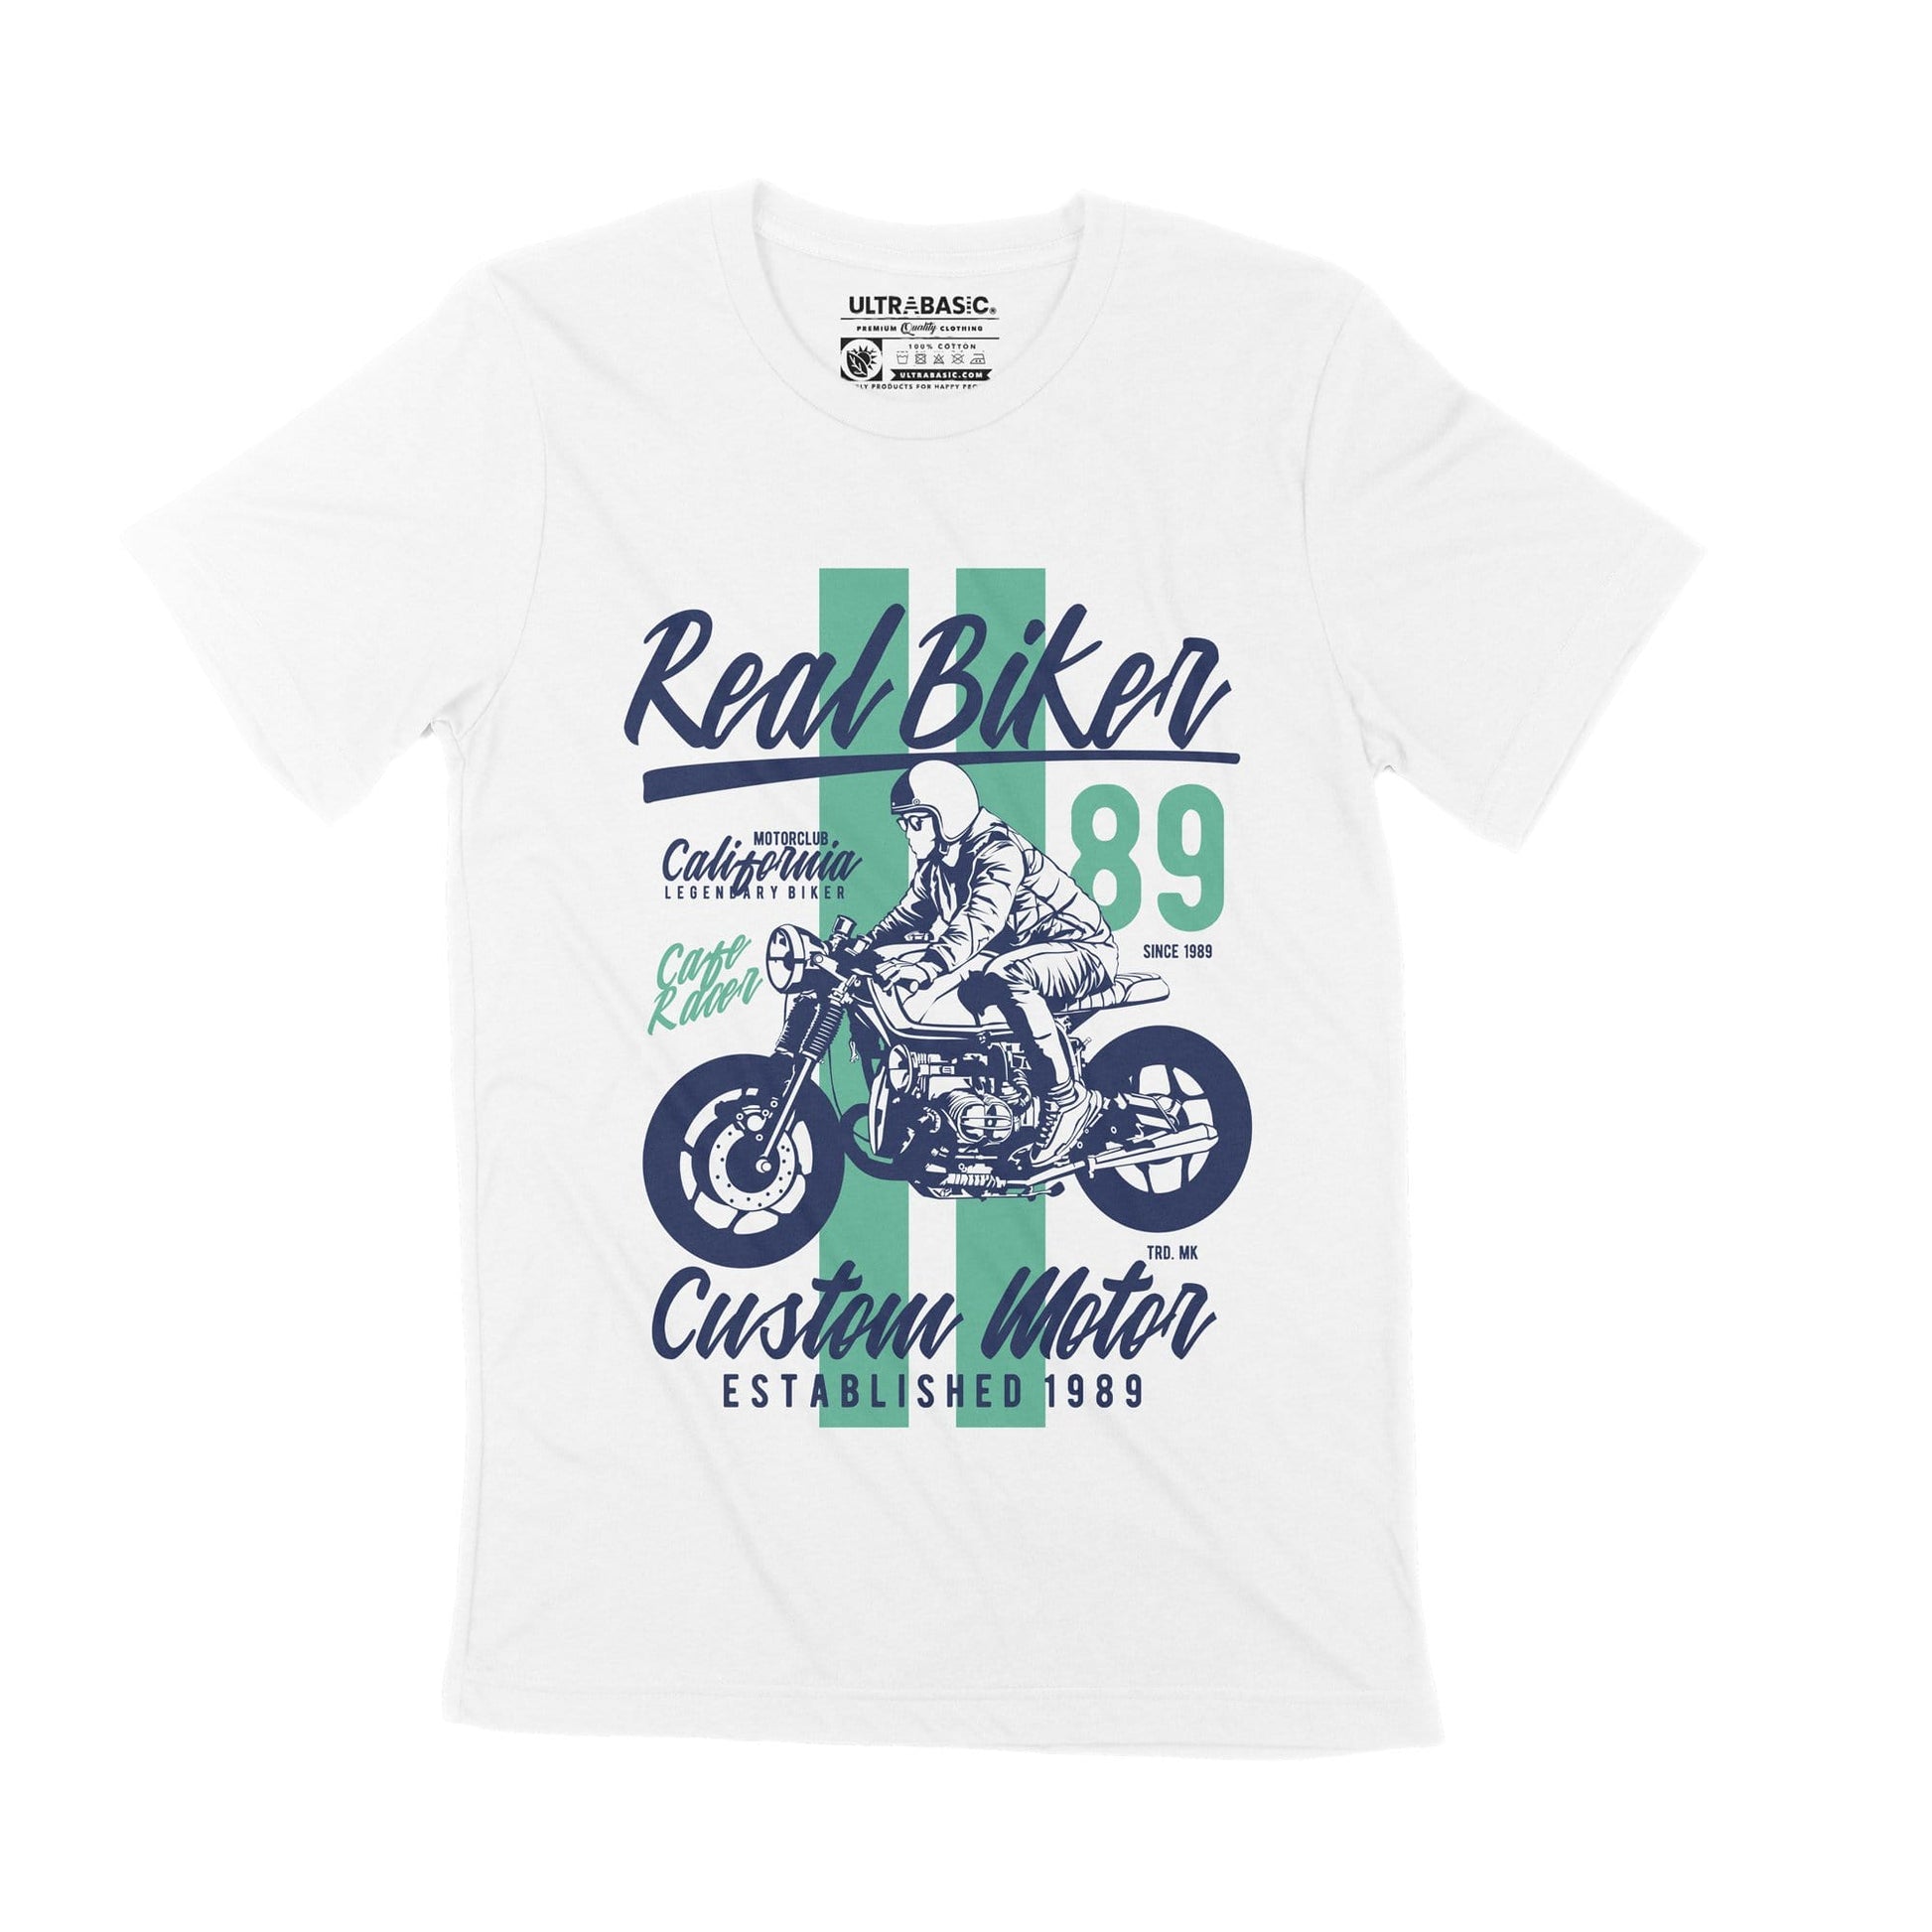 ULTRABASIC Real Biker 89 Men's T-Shirt  - Custom Motor Established 1989 california motor club clothing men outdoor shirts mechanic victory outfits usa guy apparel road live simply tees unisex tshirts rock genuine live motorbike cafe racer indian motorcycles dad bikers patches fast driving casual merchandise 